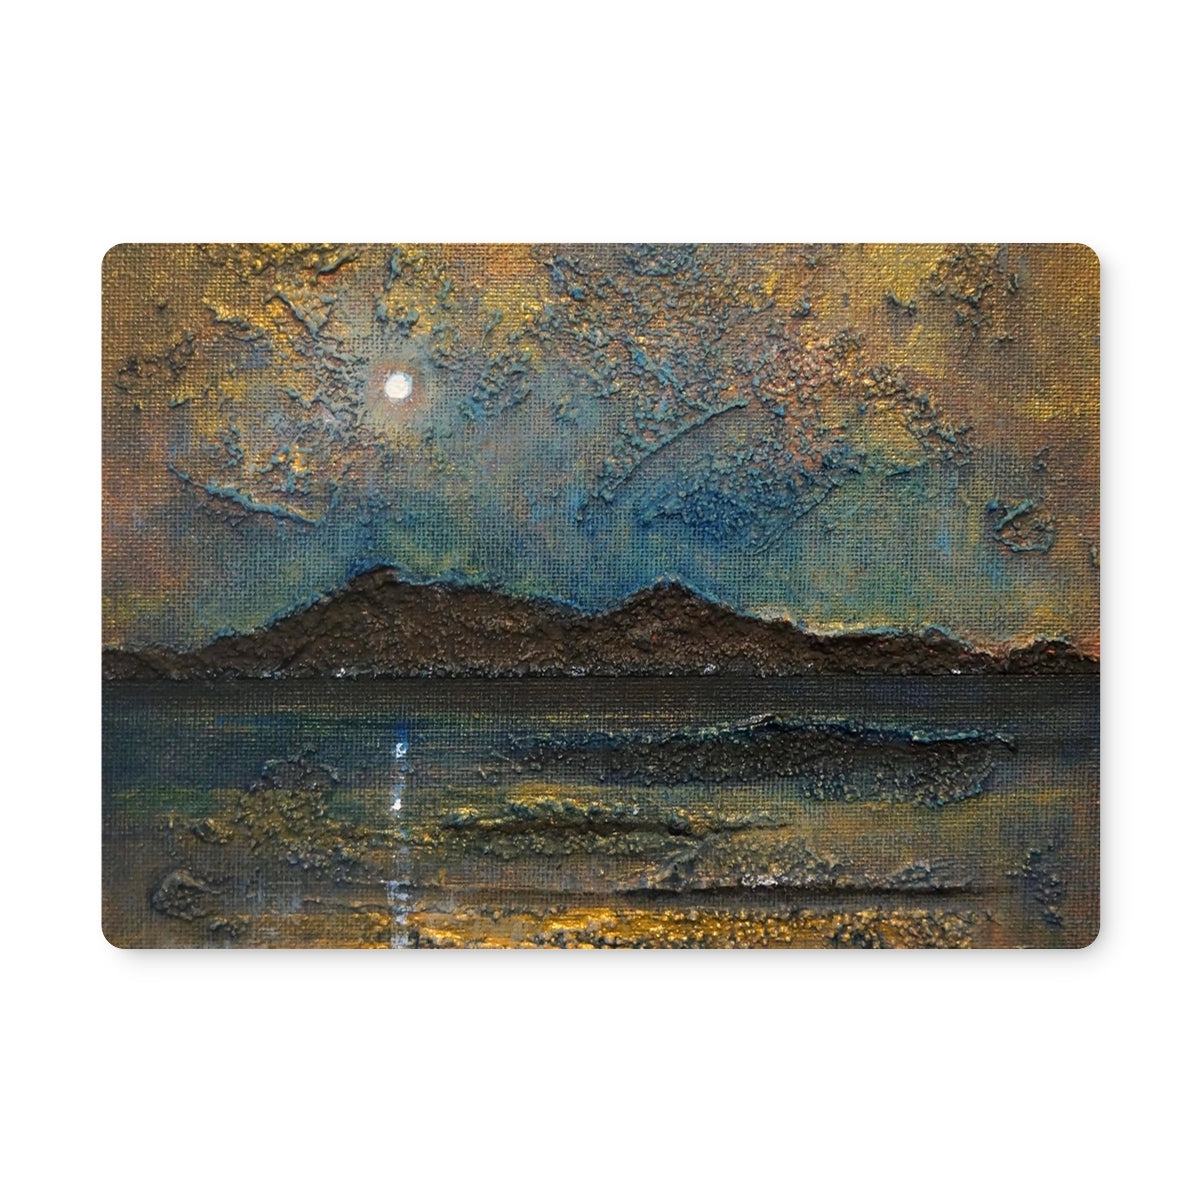 Arran Moonlight Art Gifts Placemat-Placemats-Arran Art Gallery-Single Placemat-Paintings, Prints, Homeware, Art Gifts From Scotland By Scottish Artist Kevin Hunter